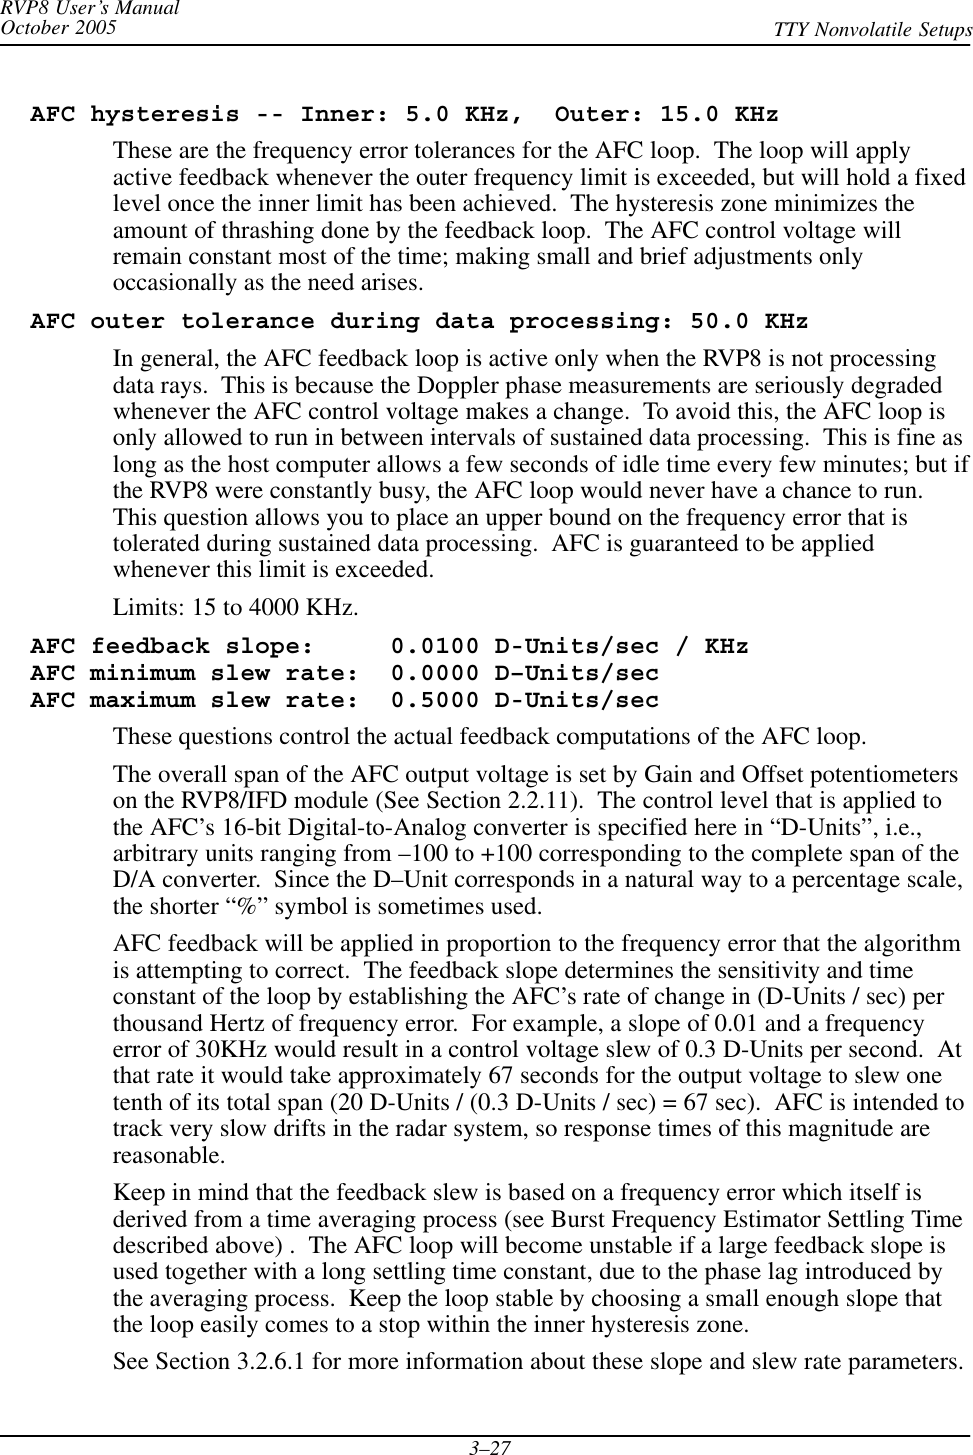 RVP8 User’s ManualOctober 2005 TTY Nonvolatile Setups3–27  AFC hysteresis -- Inner: 5.0 KHz,  Outer: 15.0 KHzThese are the frequency error tolerances for the AFC loop.  The loop will applyactive feedback whenever the outer frequency limit is exceeded, but will hold a fixedlevel once the inner limit has been achieved.  The hysteresis zone minimizes theamount of thrashing done by the feedback loop.  The AFC control voltage willremain constant most of the time; making small and brief adjustments onlyoccasionally as the need arises.  AFC outer tolerance during data processing: 50.0 KHzIn general, the AFC feedback loop is active only when the RVP8 is not processingdata rays.  This is because the Doppler phase measurements are seriously degradedwhenever the AFC control voltage makes a change.  To avoid this, the AFC loop isonly allowed to run in between intervals of sustained data processing.  This is fine aslong as the host computer allows a few seconds of idle time every few minutes; but ifthe RVP8 were constantly busy, the AFC loop would never have a chance to run.This question allows you to place an upper bound on the frequency error that istolerated during sustained data processing.  AFC is guaranteed to be appliedwhenever this limit is exceeded.Limits: 15 to 4000 KHz.  AFC feedback slope:     0.0100 D-Units/sec / KHz  AFC minimum slew rate:  0.0000 D–Units/sec  AFC maximum slew rate:  0.5000 D-Units/secThese questions control the actual feedback computations of the AFC loop.The overall span of the AFC output voltage is set by Gain and Offset potentiometerson the RVP8/IFD module (See Section 2.2.11).  The control level that is applied tothe AFC’s 16-bit Digital-to-Analog converter is specified here in “D-Units”, i.e.,arbitrary units ranging from –100 to +100 corresponding to the complete span of theD/A converter.  Since the D–Unit corresponds in a natural way to a percentage scale,the shorter “%” symbol is sometimes used.AFC feedback will be applied in proportion to the frequency error that the algorithmis attempting to correct.  The feedback slope determines the sensitivity and timeconstant of the loop by establishing the AFC’s rate of change in (D-Units / sec) perthousand Hertz of frequency error.  For example, a slope of 0.01 and a frequencyerror of 30KHz would result in a control voltage slew of 0.3 D-Units per second.  Atthat rate it would take approximately 67 seconds for the output voltage to slew onetenth of its total span (20 D-Units / (0.3 D-Units / sec) = 67 sec).  AFC is intended totrack very slow drifts in the radar system, so response times of this magnitude arereasonable.Keep in mind that the feedback slew is based on a frequency error which itself isderived from a time averaging process (see Burst Frequency Estimator Settling Timedescribed above) .  The AFC loop will become unstable if a large feedback slope isused together with a long settling time constant, due to the phase lag introduced bythe averaging process.  Keep the loop stable by choosing a small enough slope thatthe loop easily comes to a stop within the inner hysteresis zone.See Section 3.2.6.1 for more information about these slope and slew rate parameters.